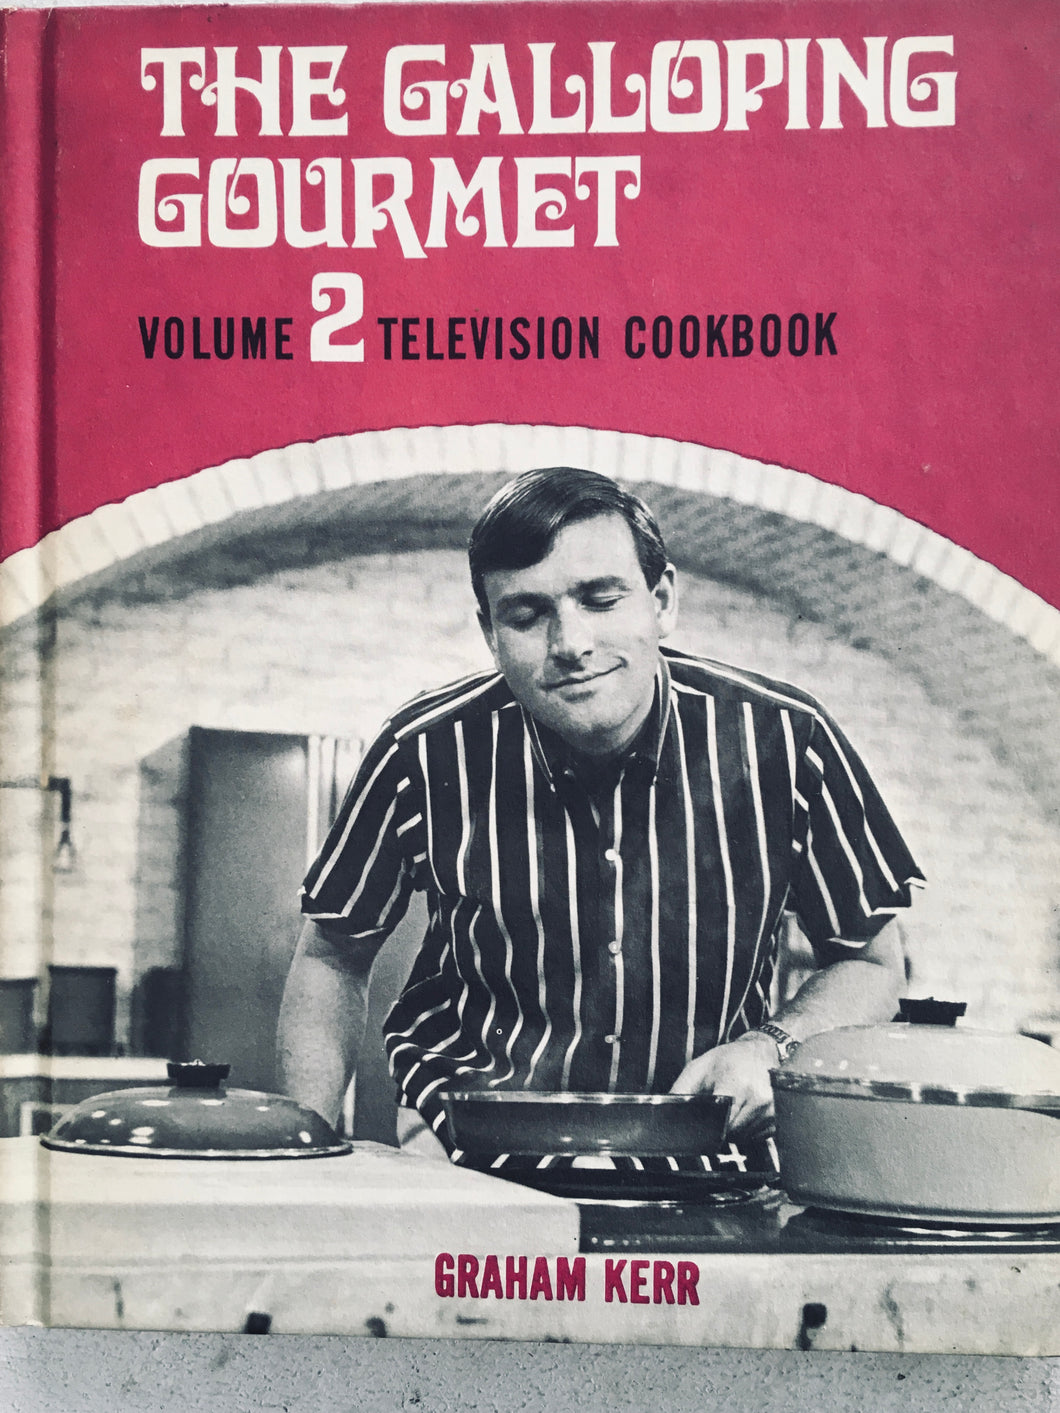 The Galloping Gourmet Television Cookbook Vol 2 by Graham Kerr